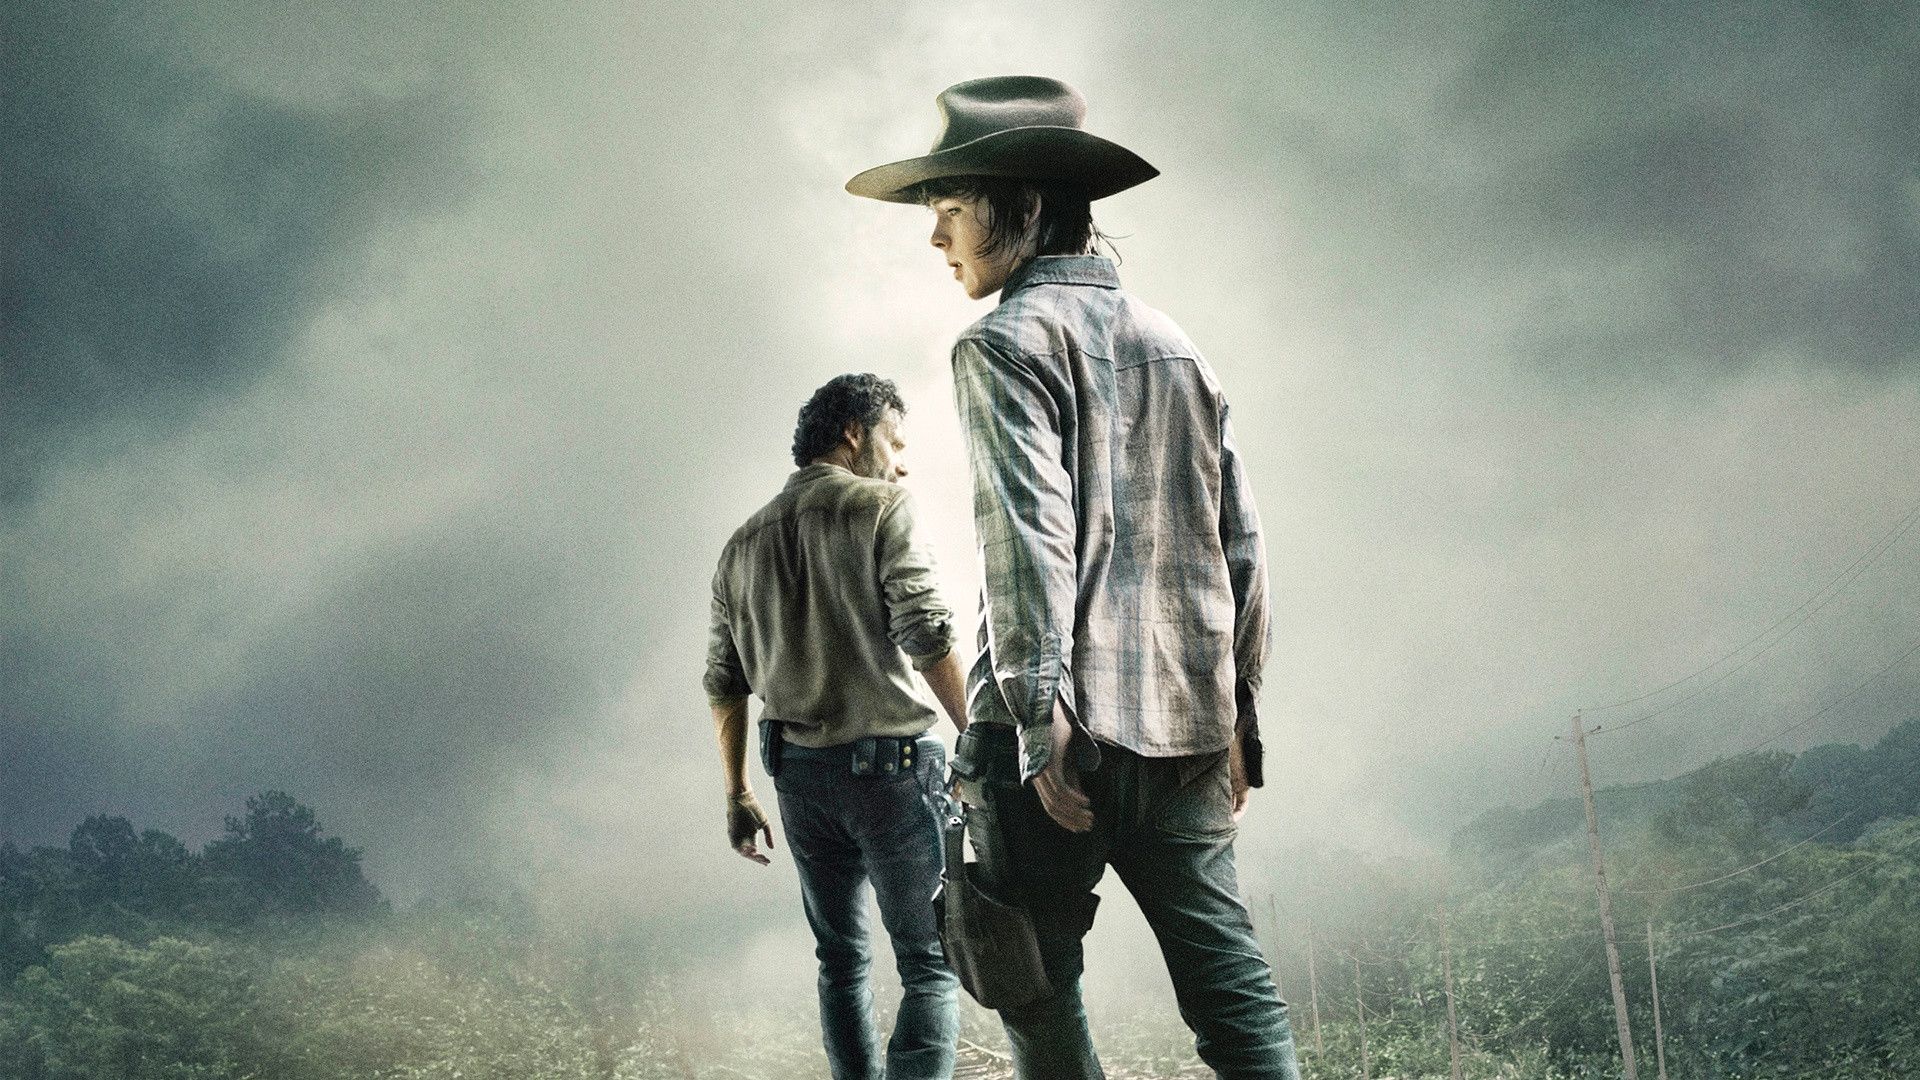 The Walking Dead Full HD Widescreen wallpapers for